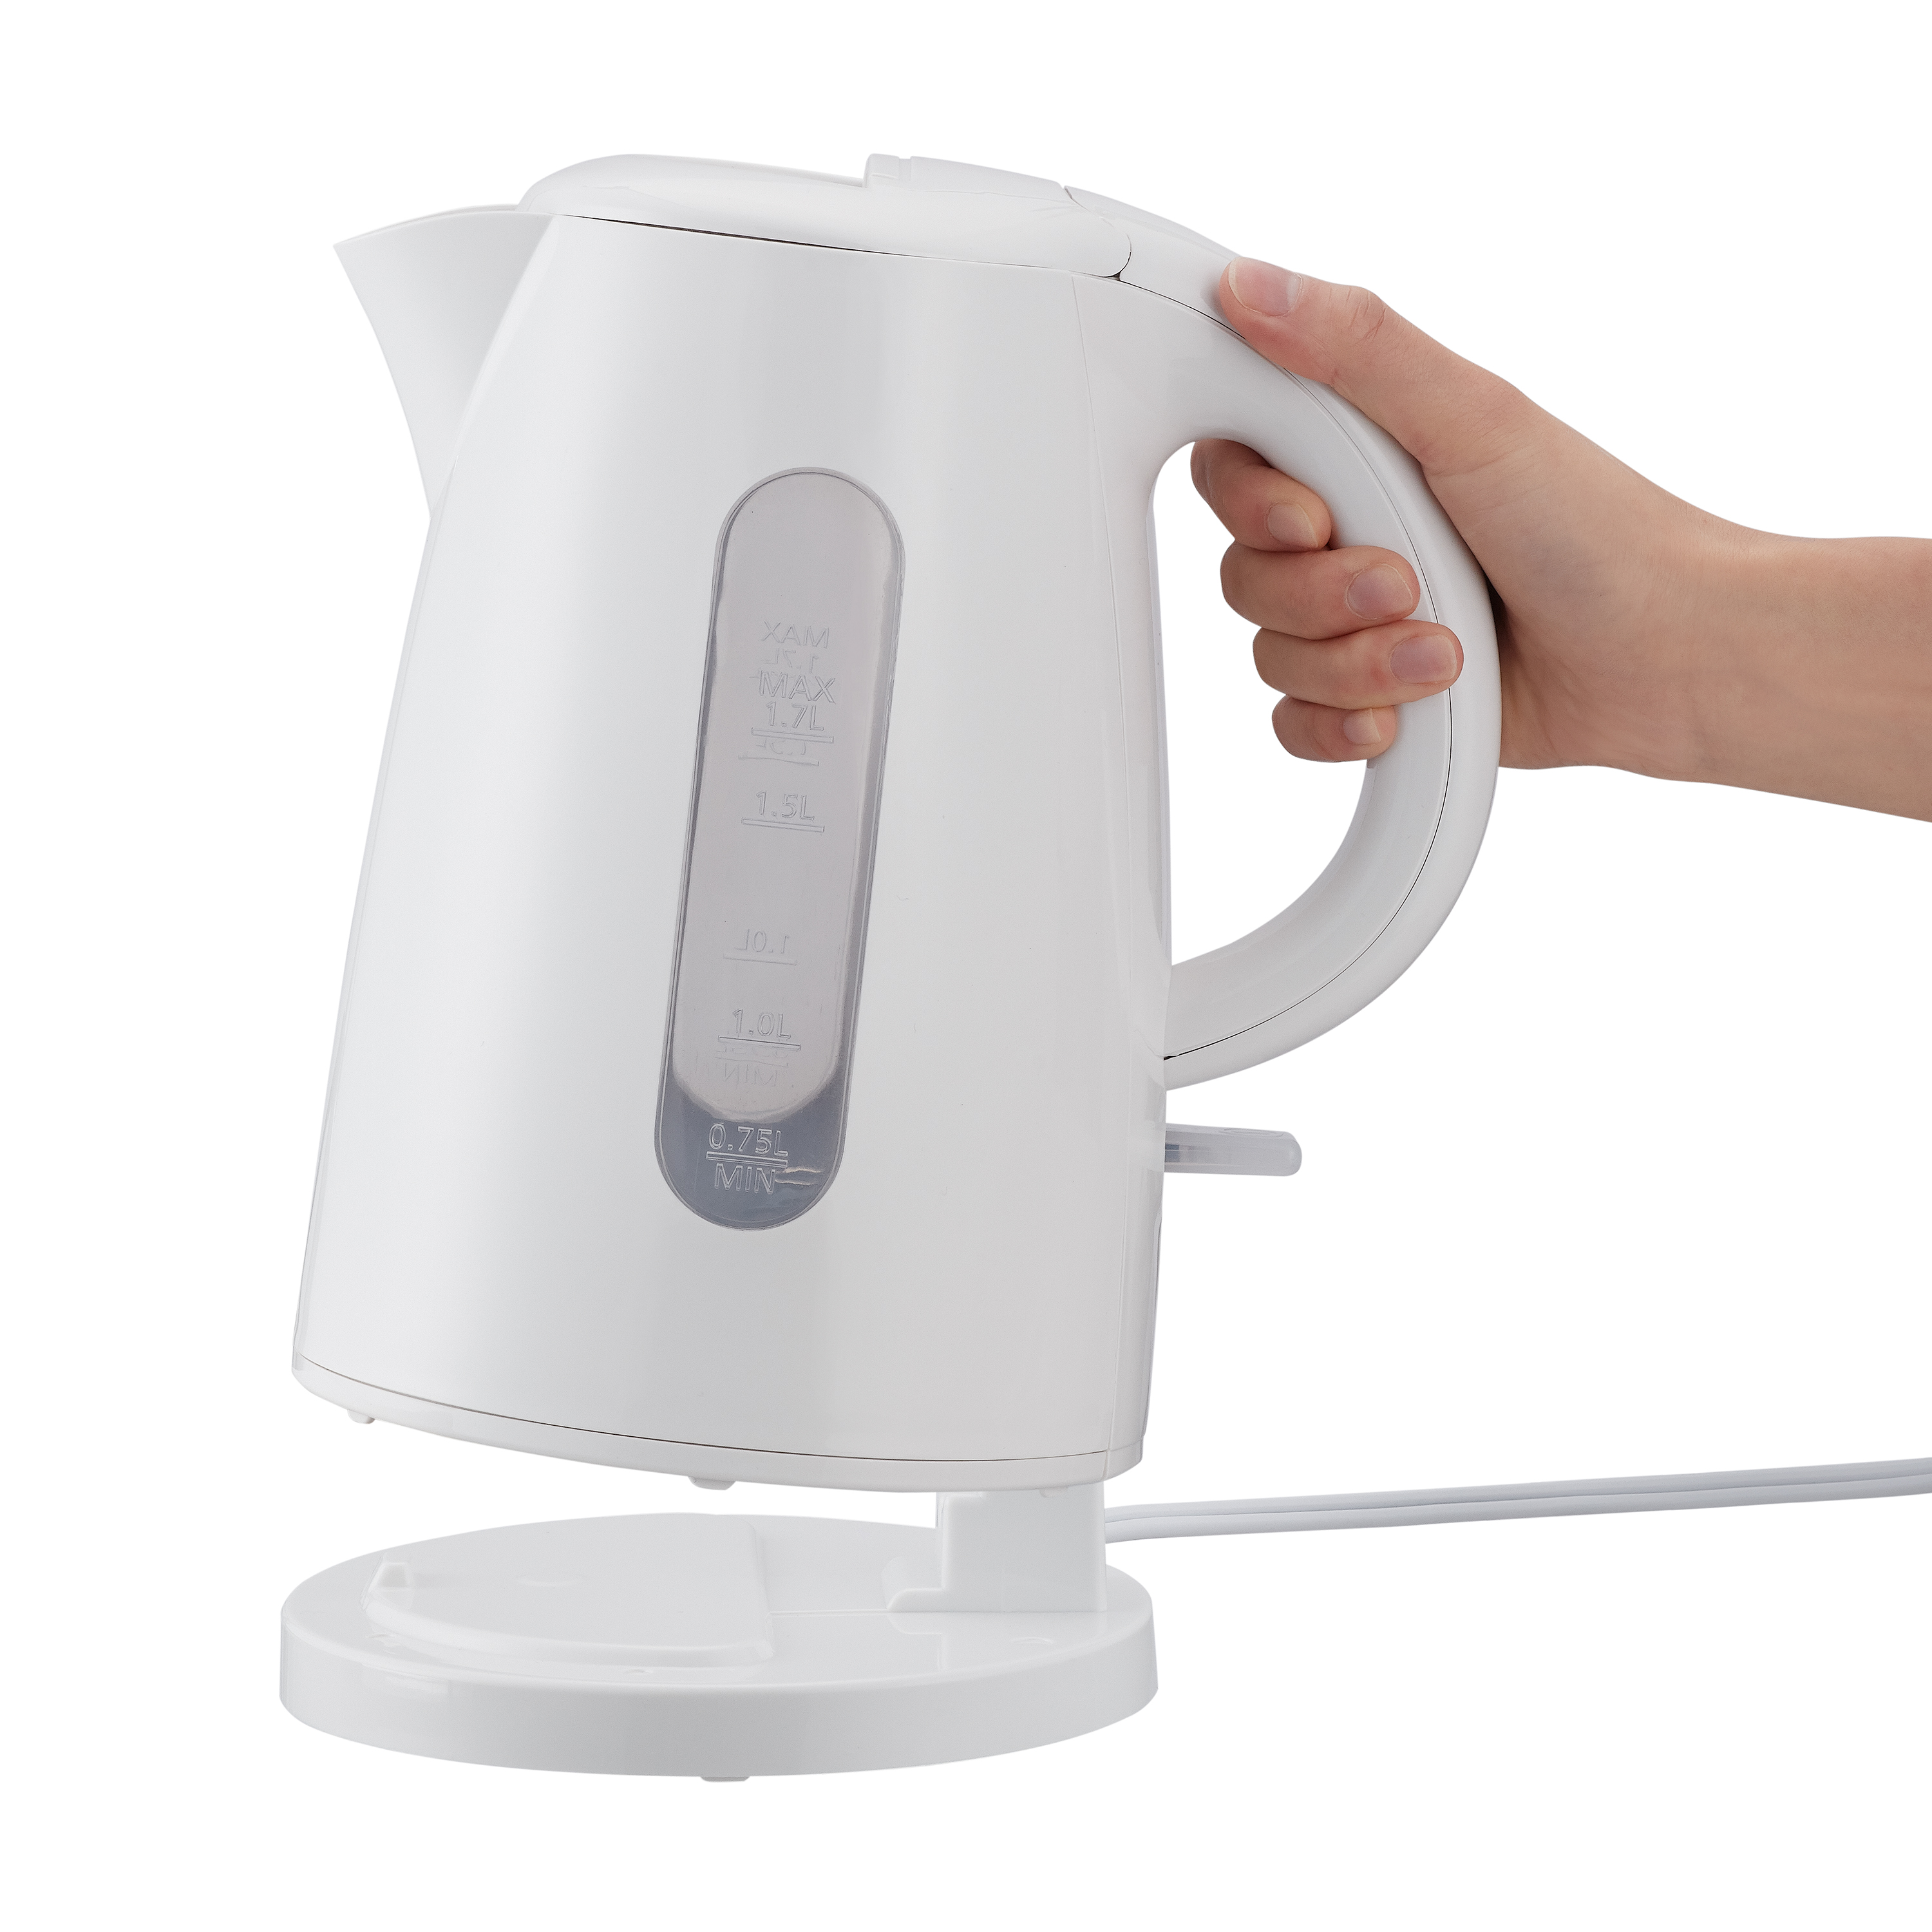 Mainstays 1.7 Liter Plastic Electric Kettle, White - image 3 of 6